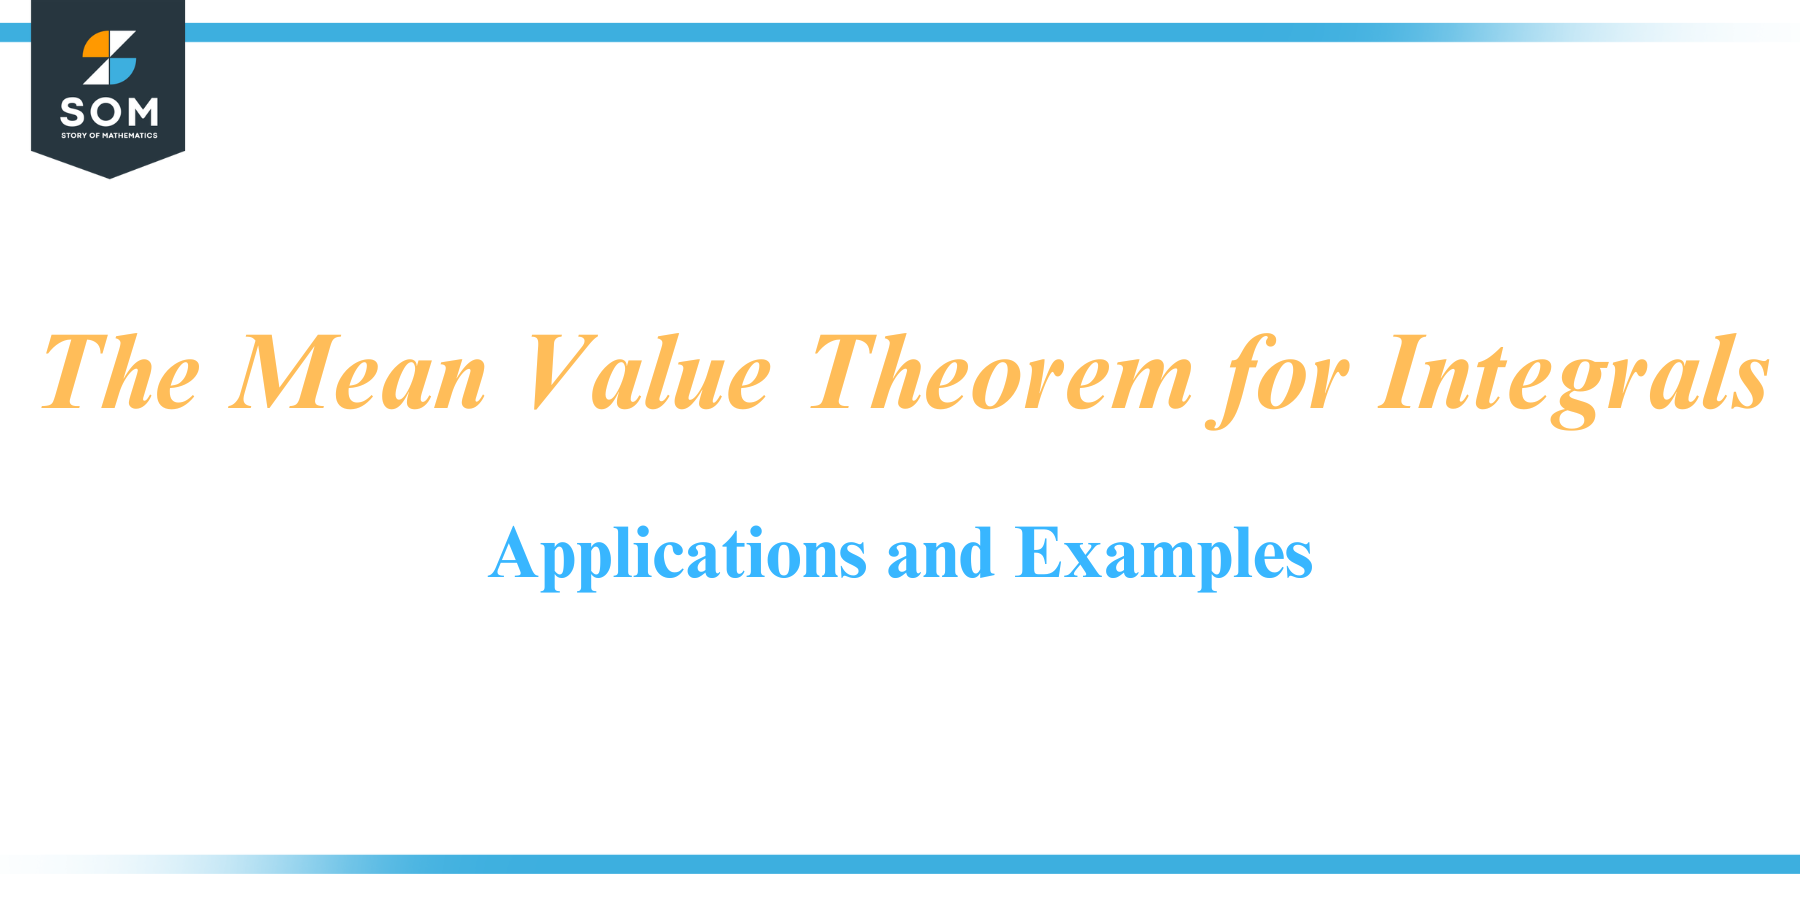 The Mean Value Theorem for Integrals Applications and